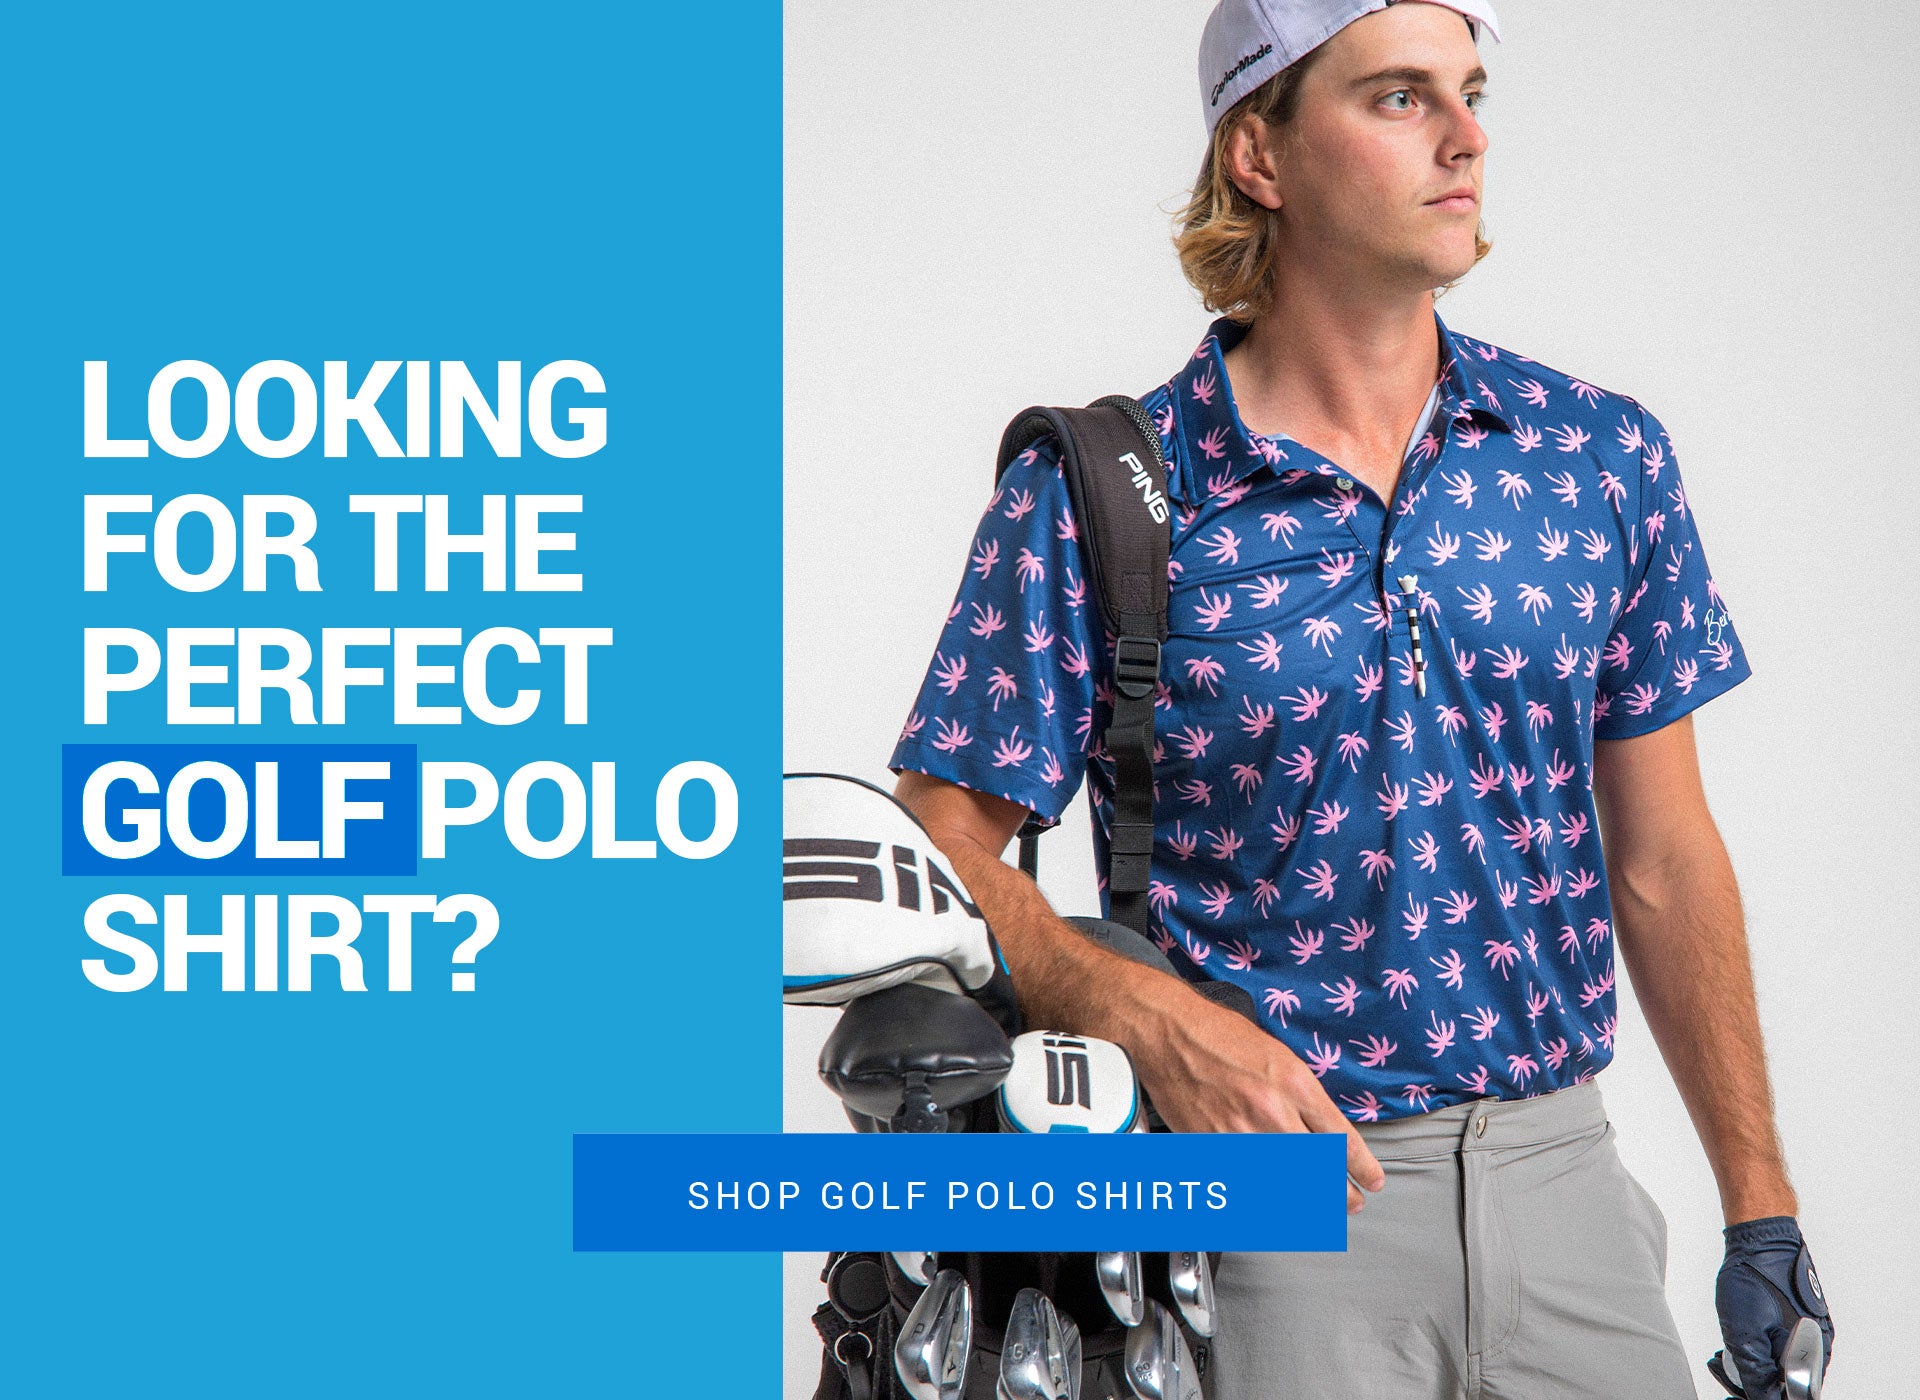 The best Golf Polo Shirt to enjoy The Open Championship